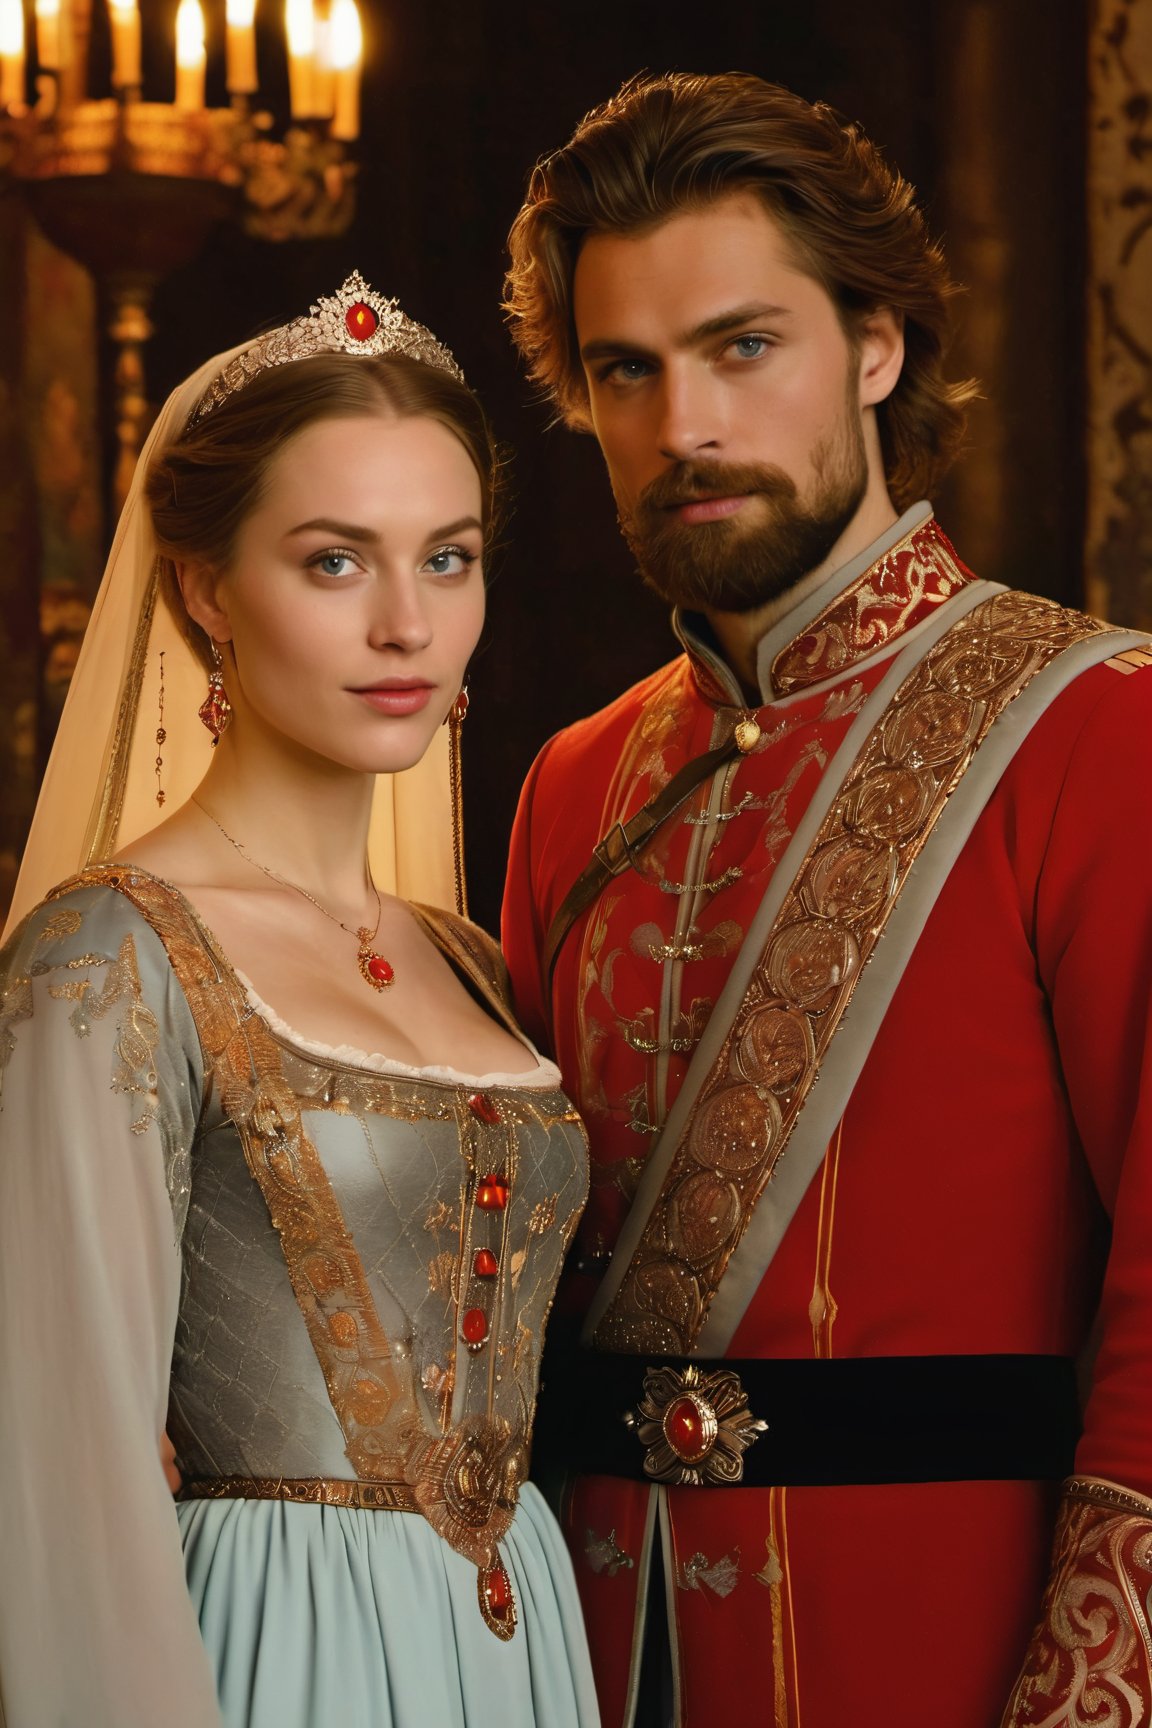 Husbands of the monarchy, 35 year olds, porcelain white skin, blue-gray eyes, neat brown hair, Bearded man and beautiful woman with traditional Russian ornamentation with gold details and red fabrics, (Moscow Principality Monarchy of the 13th century), twilight environment with a dim light on their faces, ultra detailed, (photorealistic),Movie Still,aw0k euphoric style,photo r3al